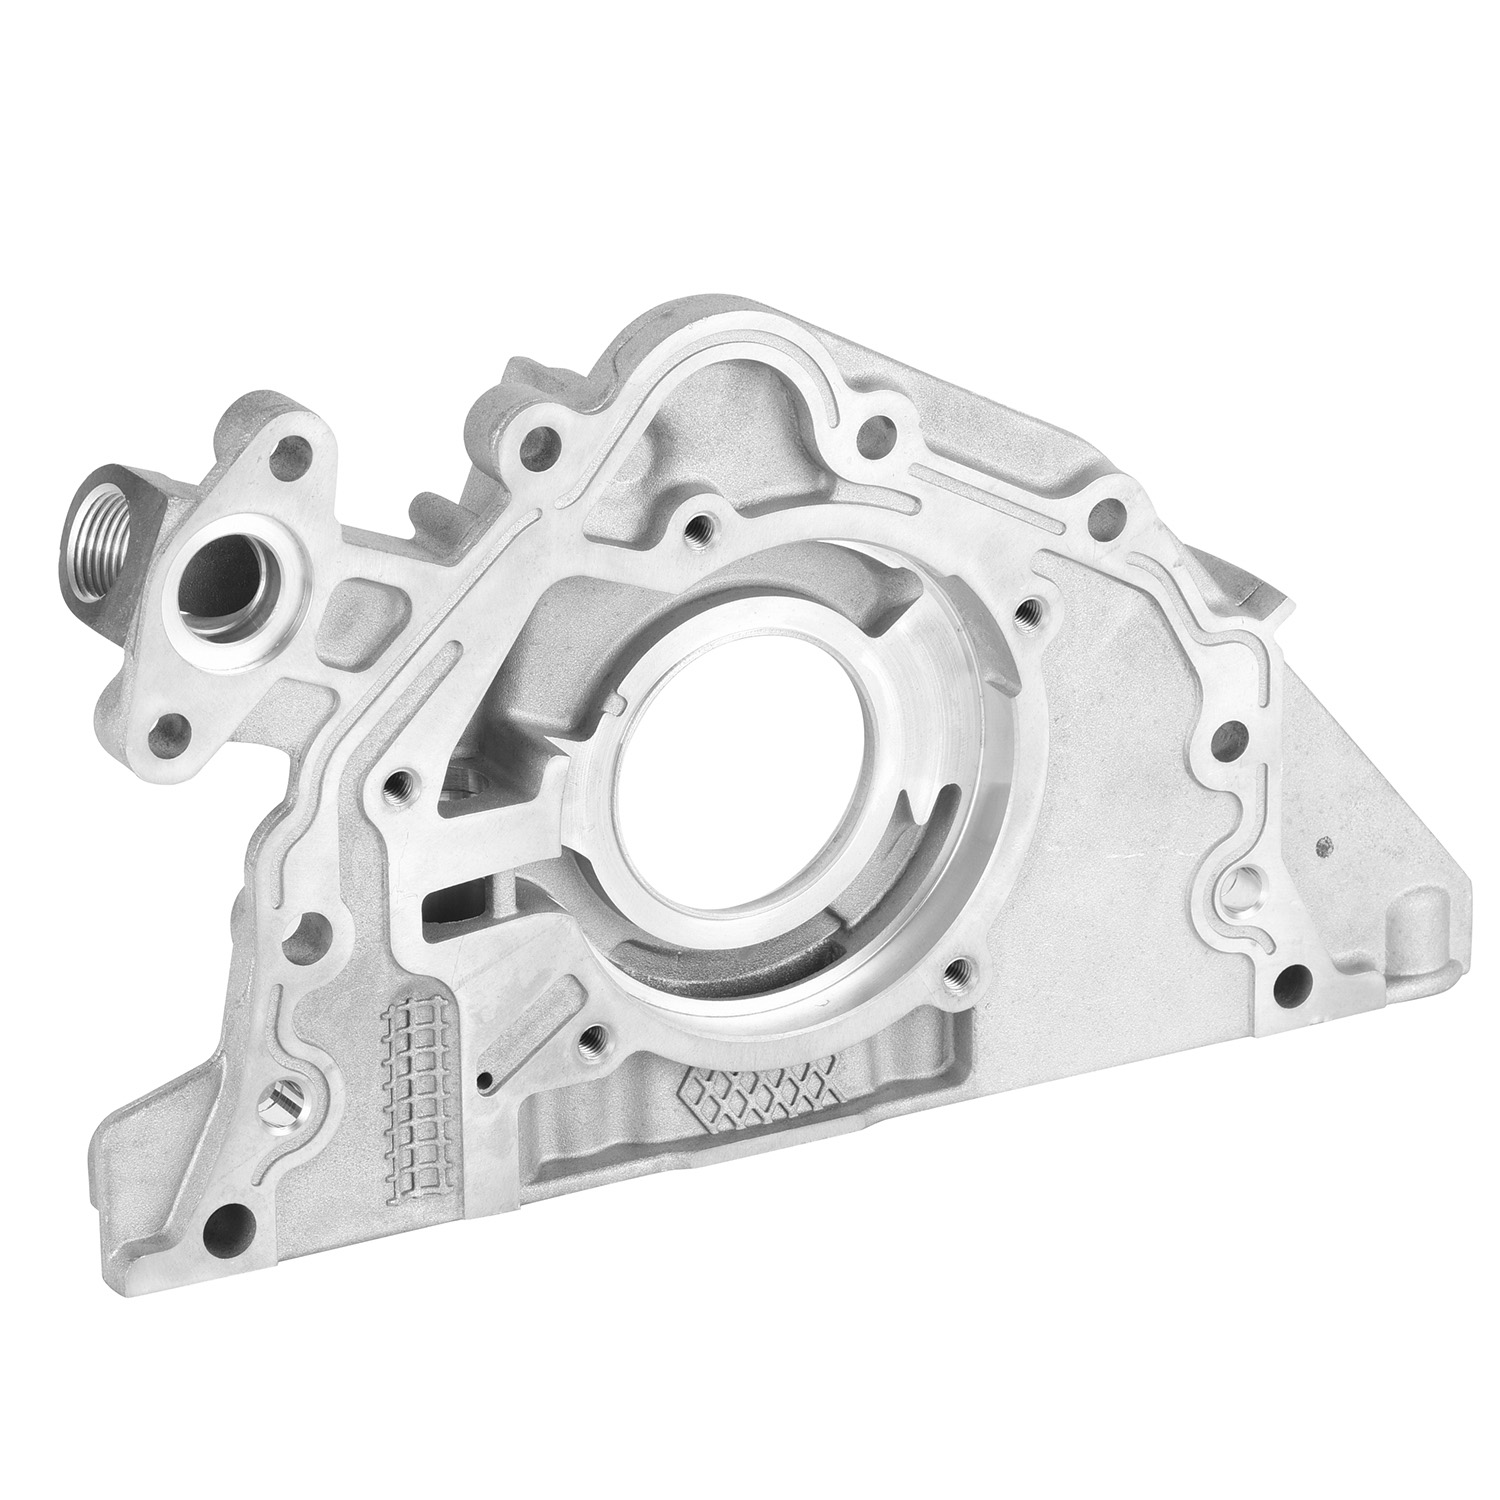 043.Aluminum Alloy Die Casting side cover ADC12-2022-08-09